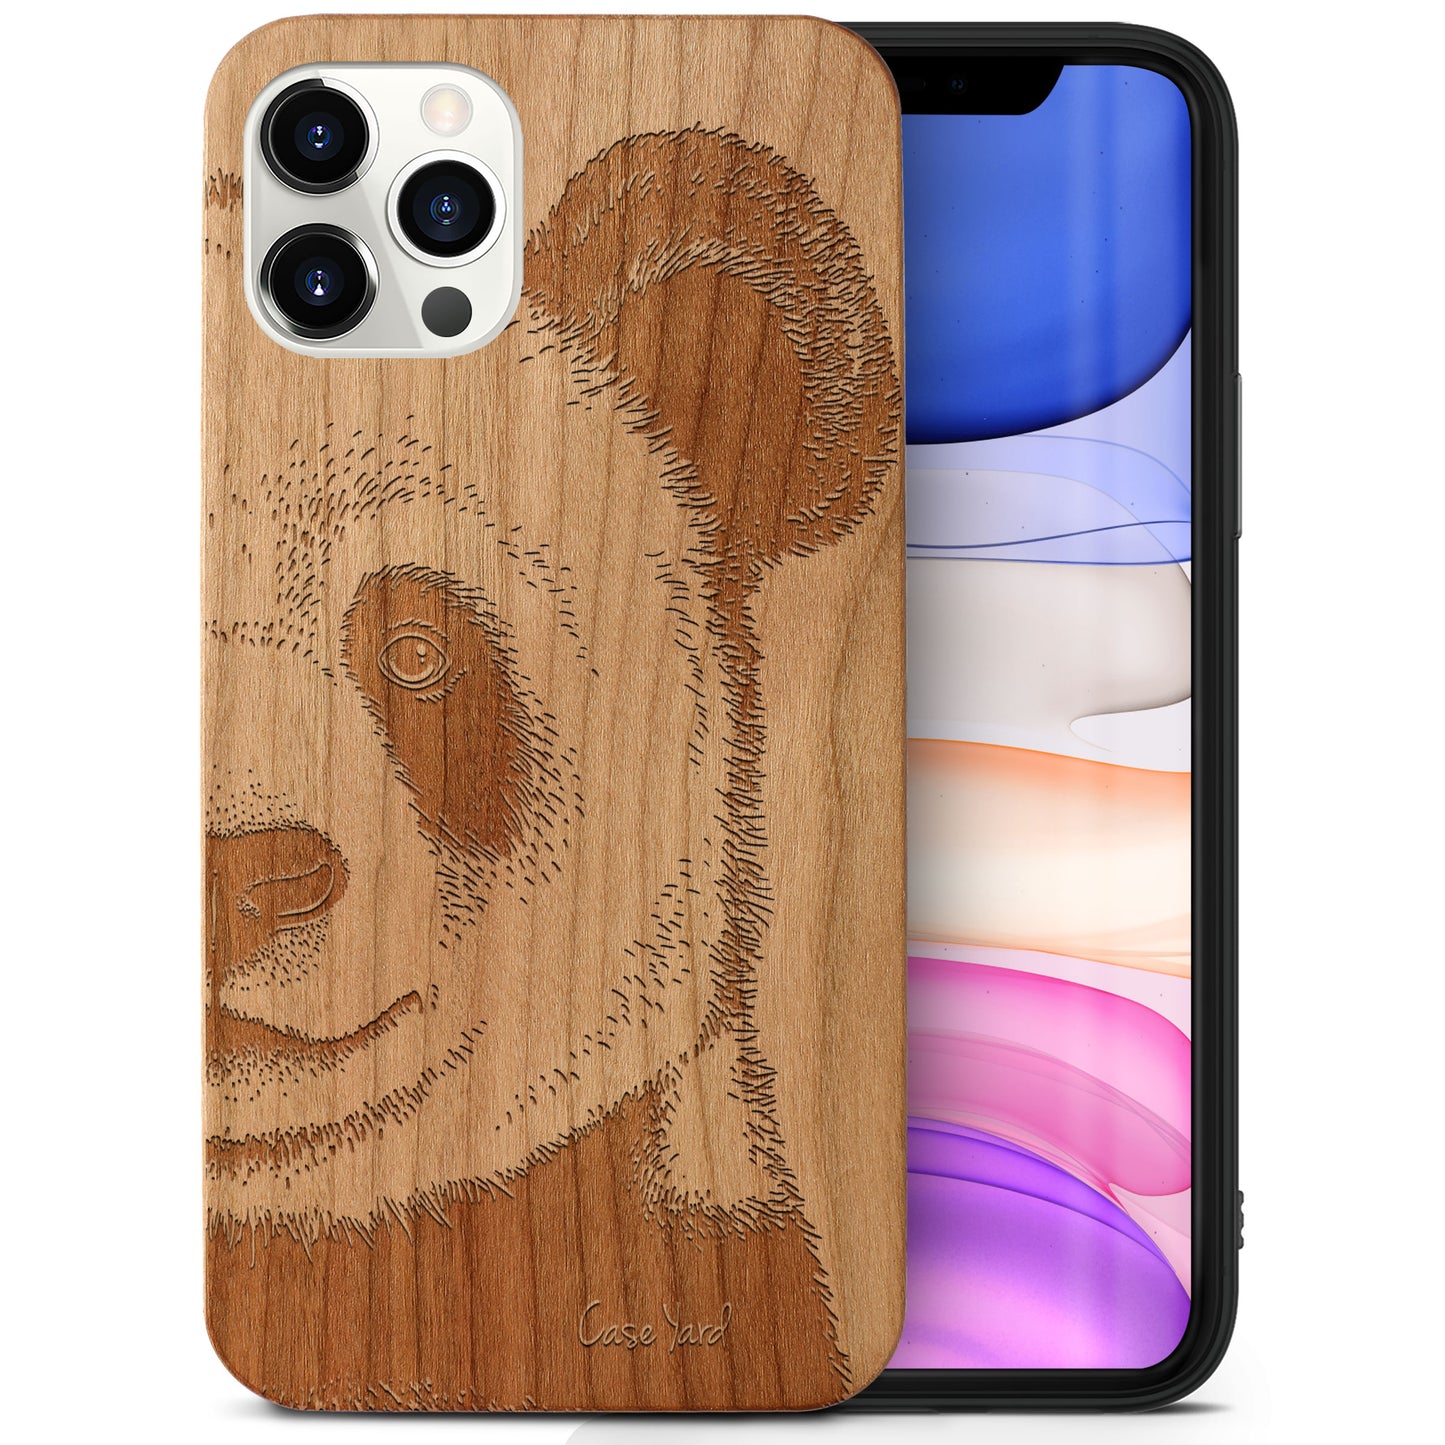 Wooden Cell Phone Case Cover, Laser Engraved case for iPhone & Samsung phone Panda Face Wood Design